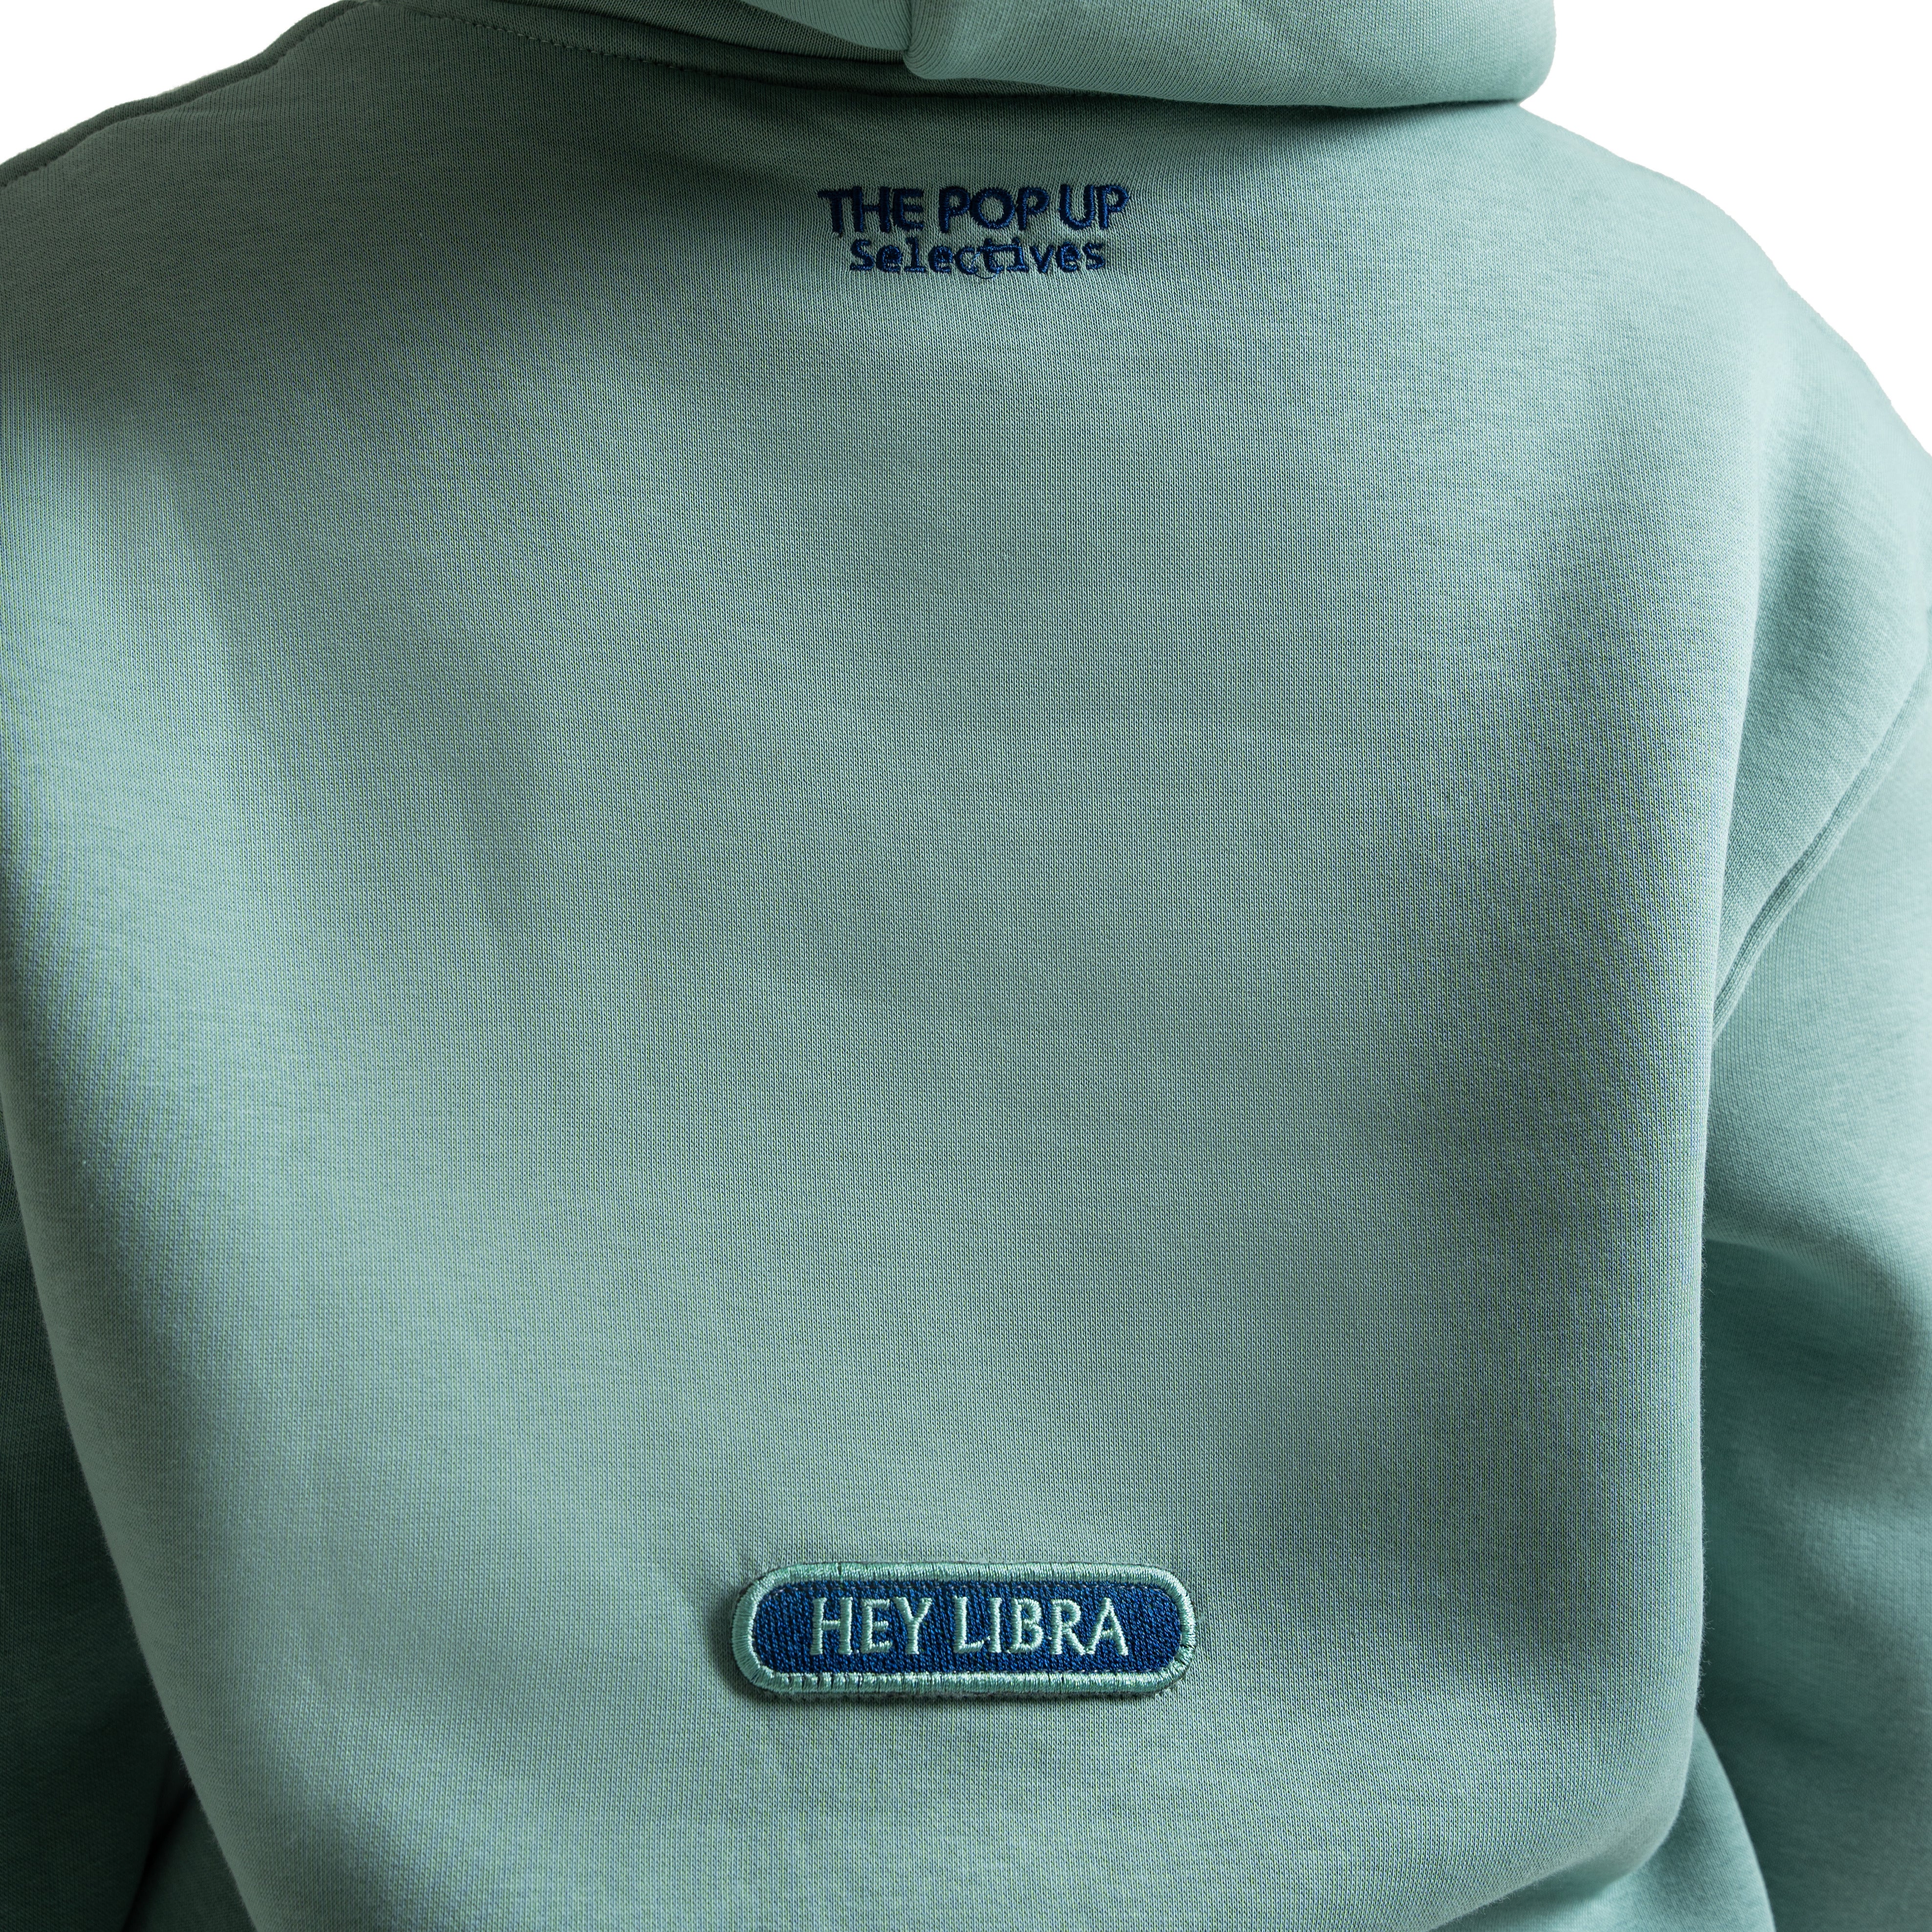 The Pop Up Selectives Libra Hoodie